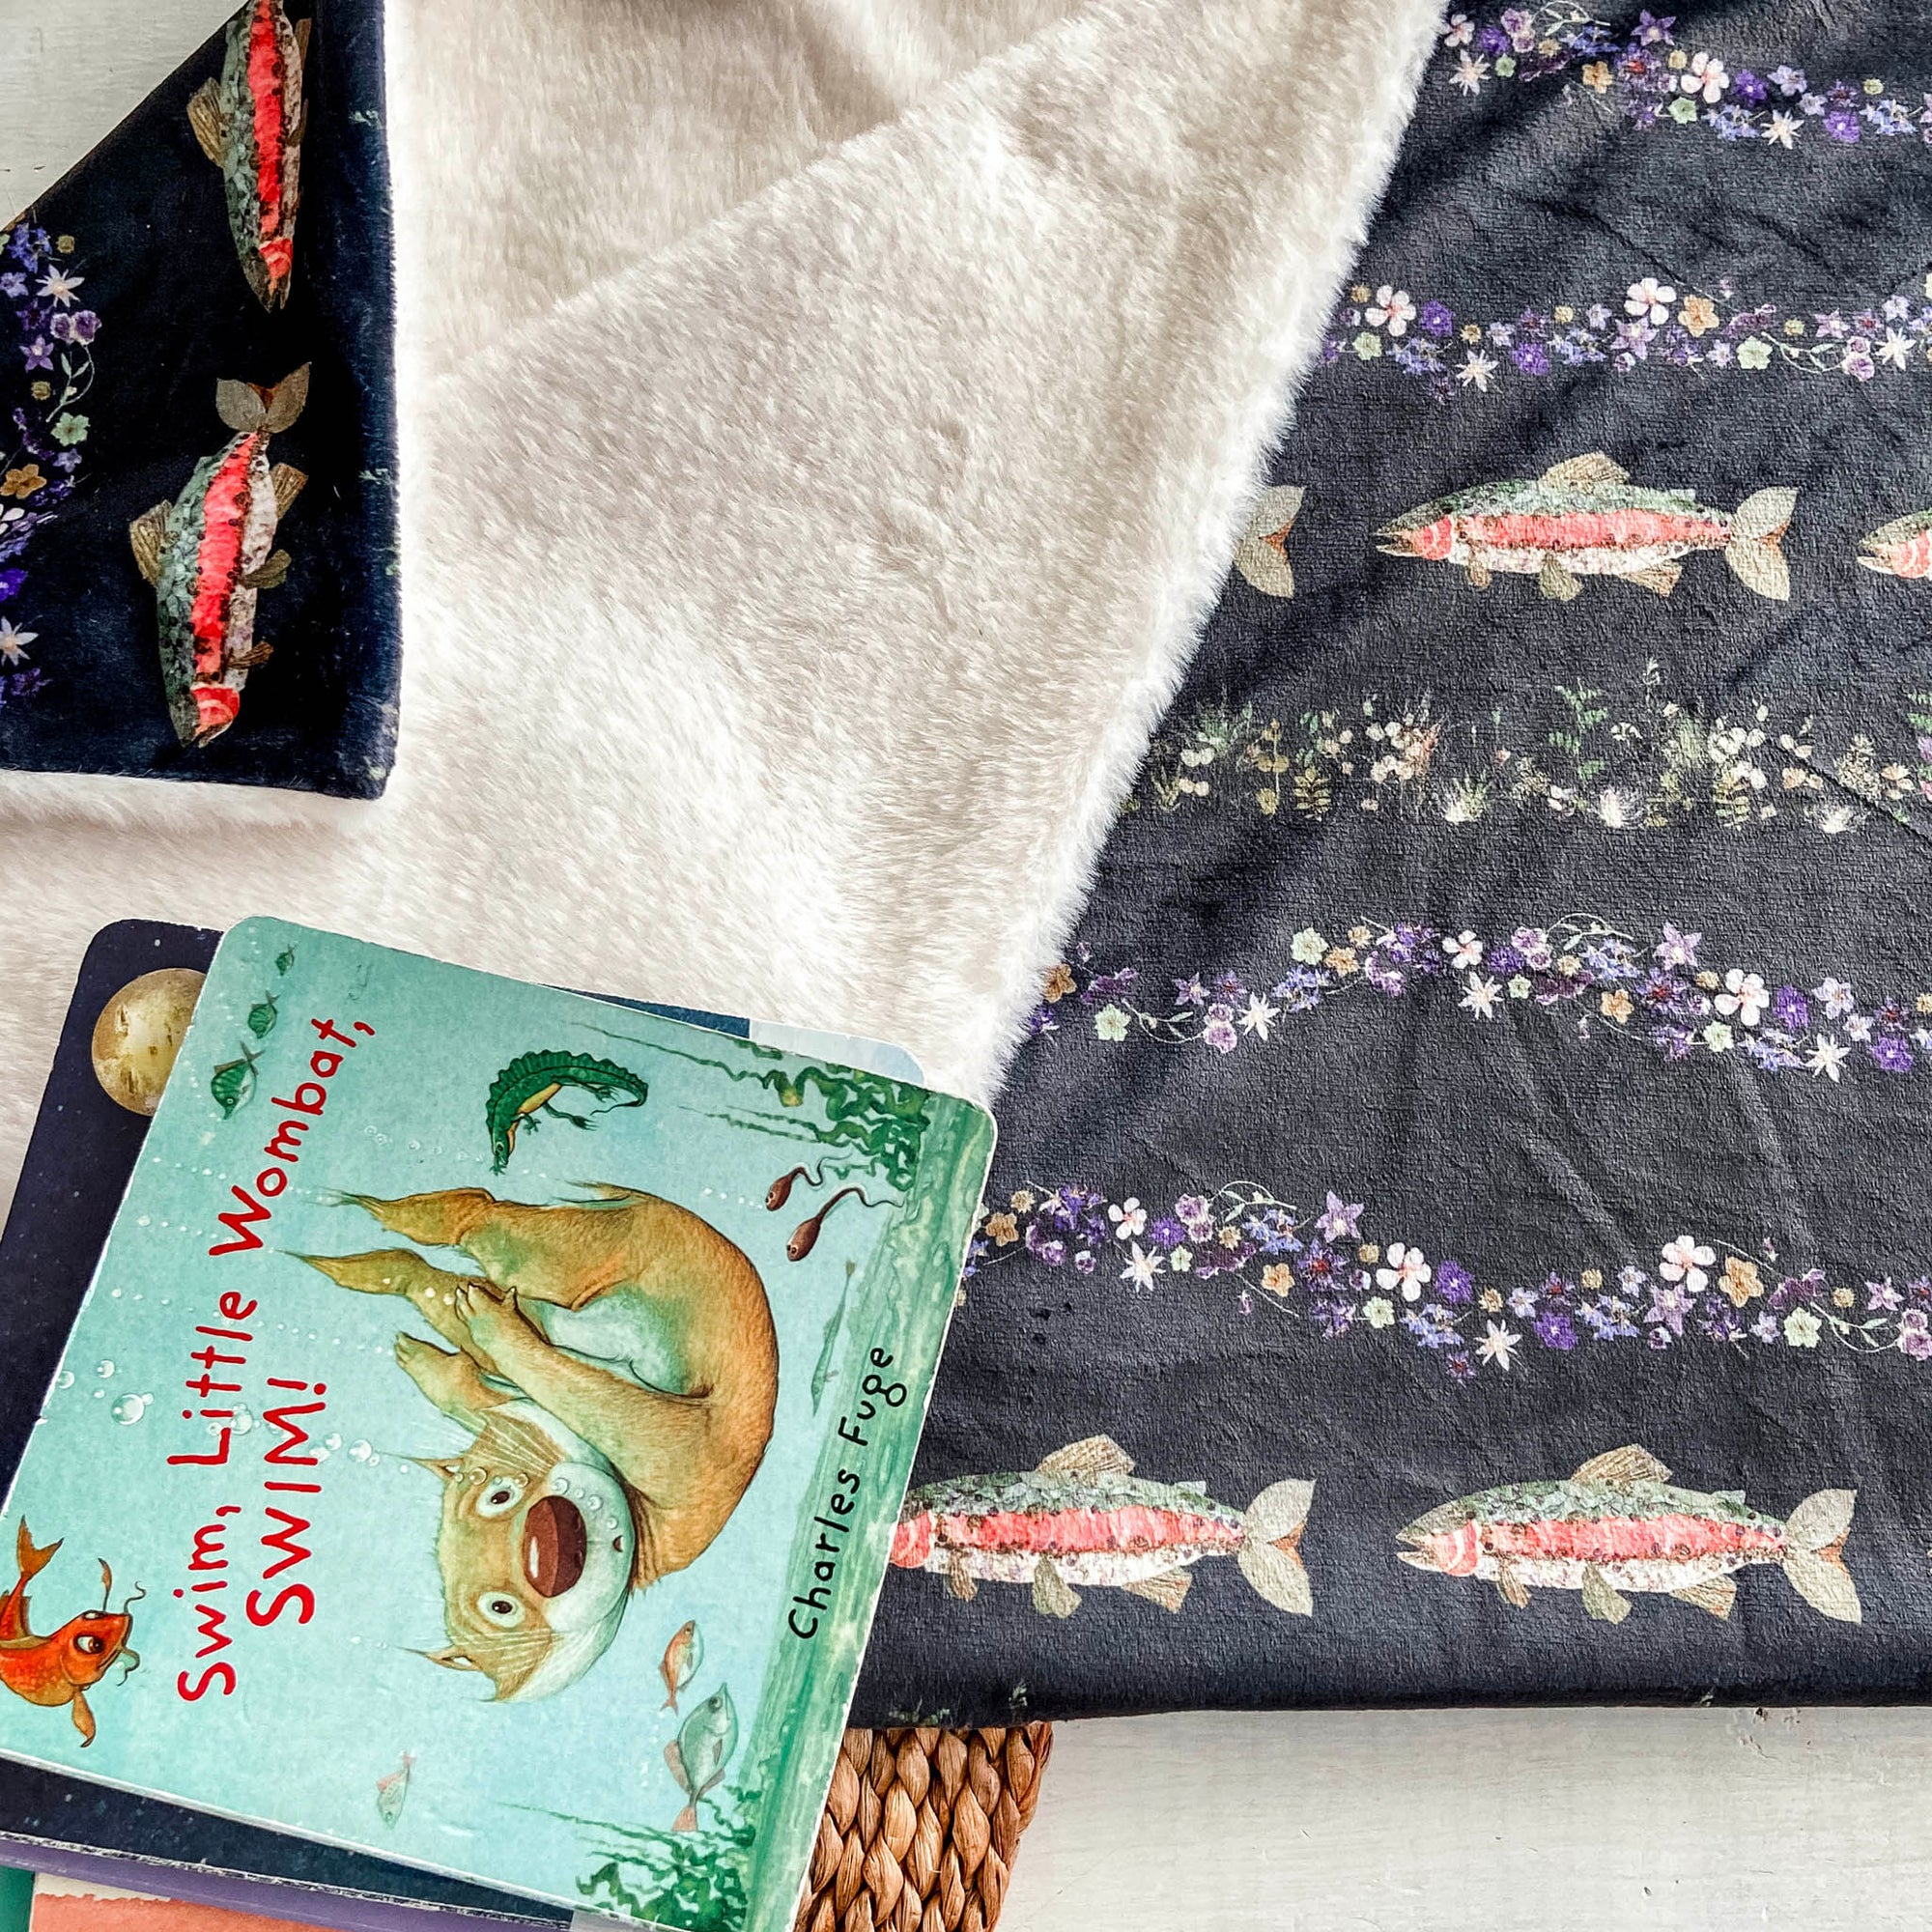 Floral Baby Blanket with Fish Print displayed with baby books